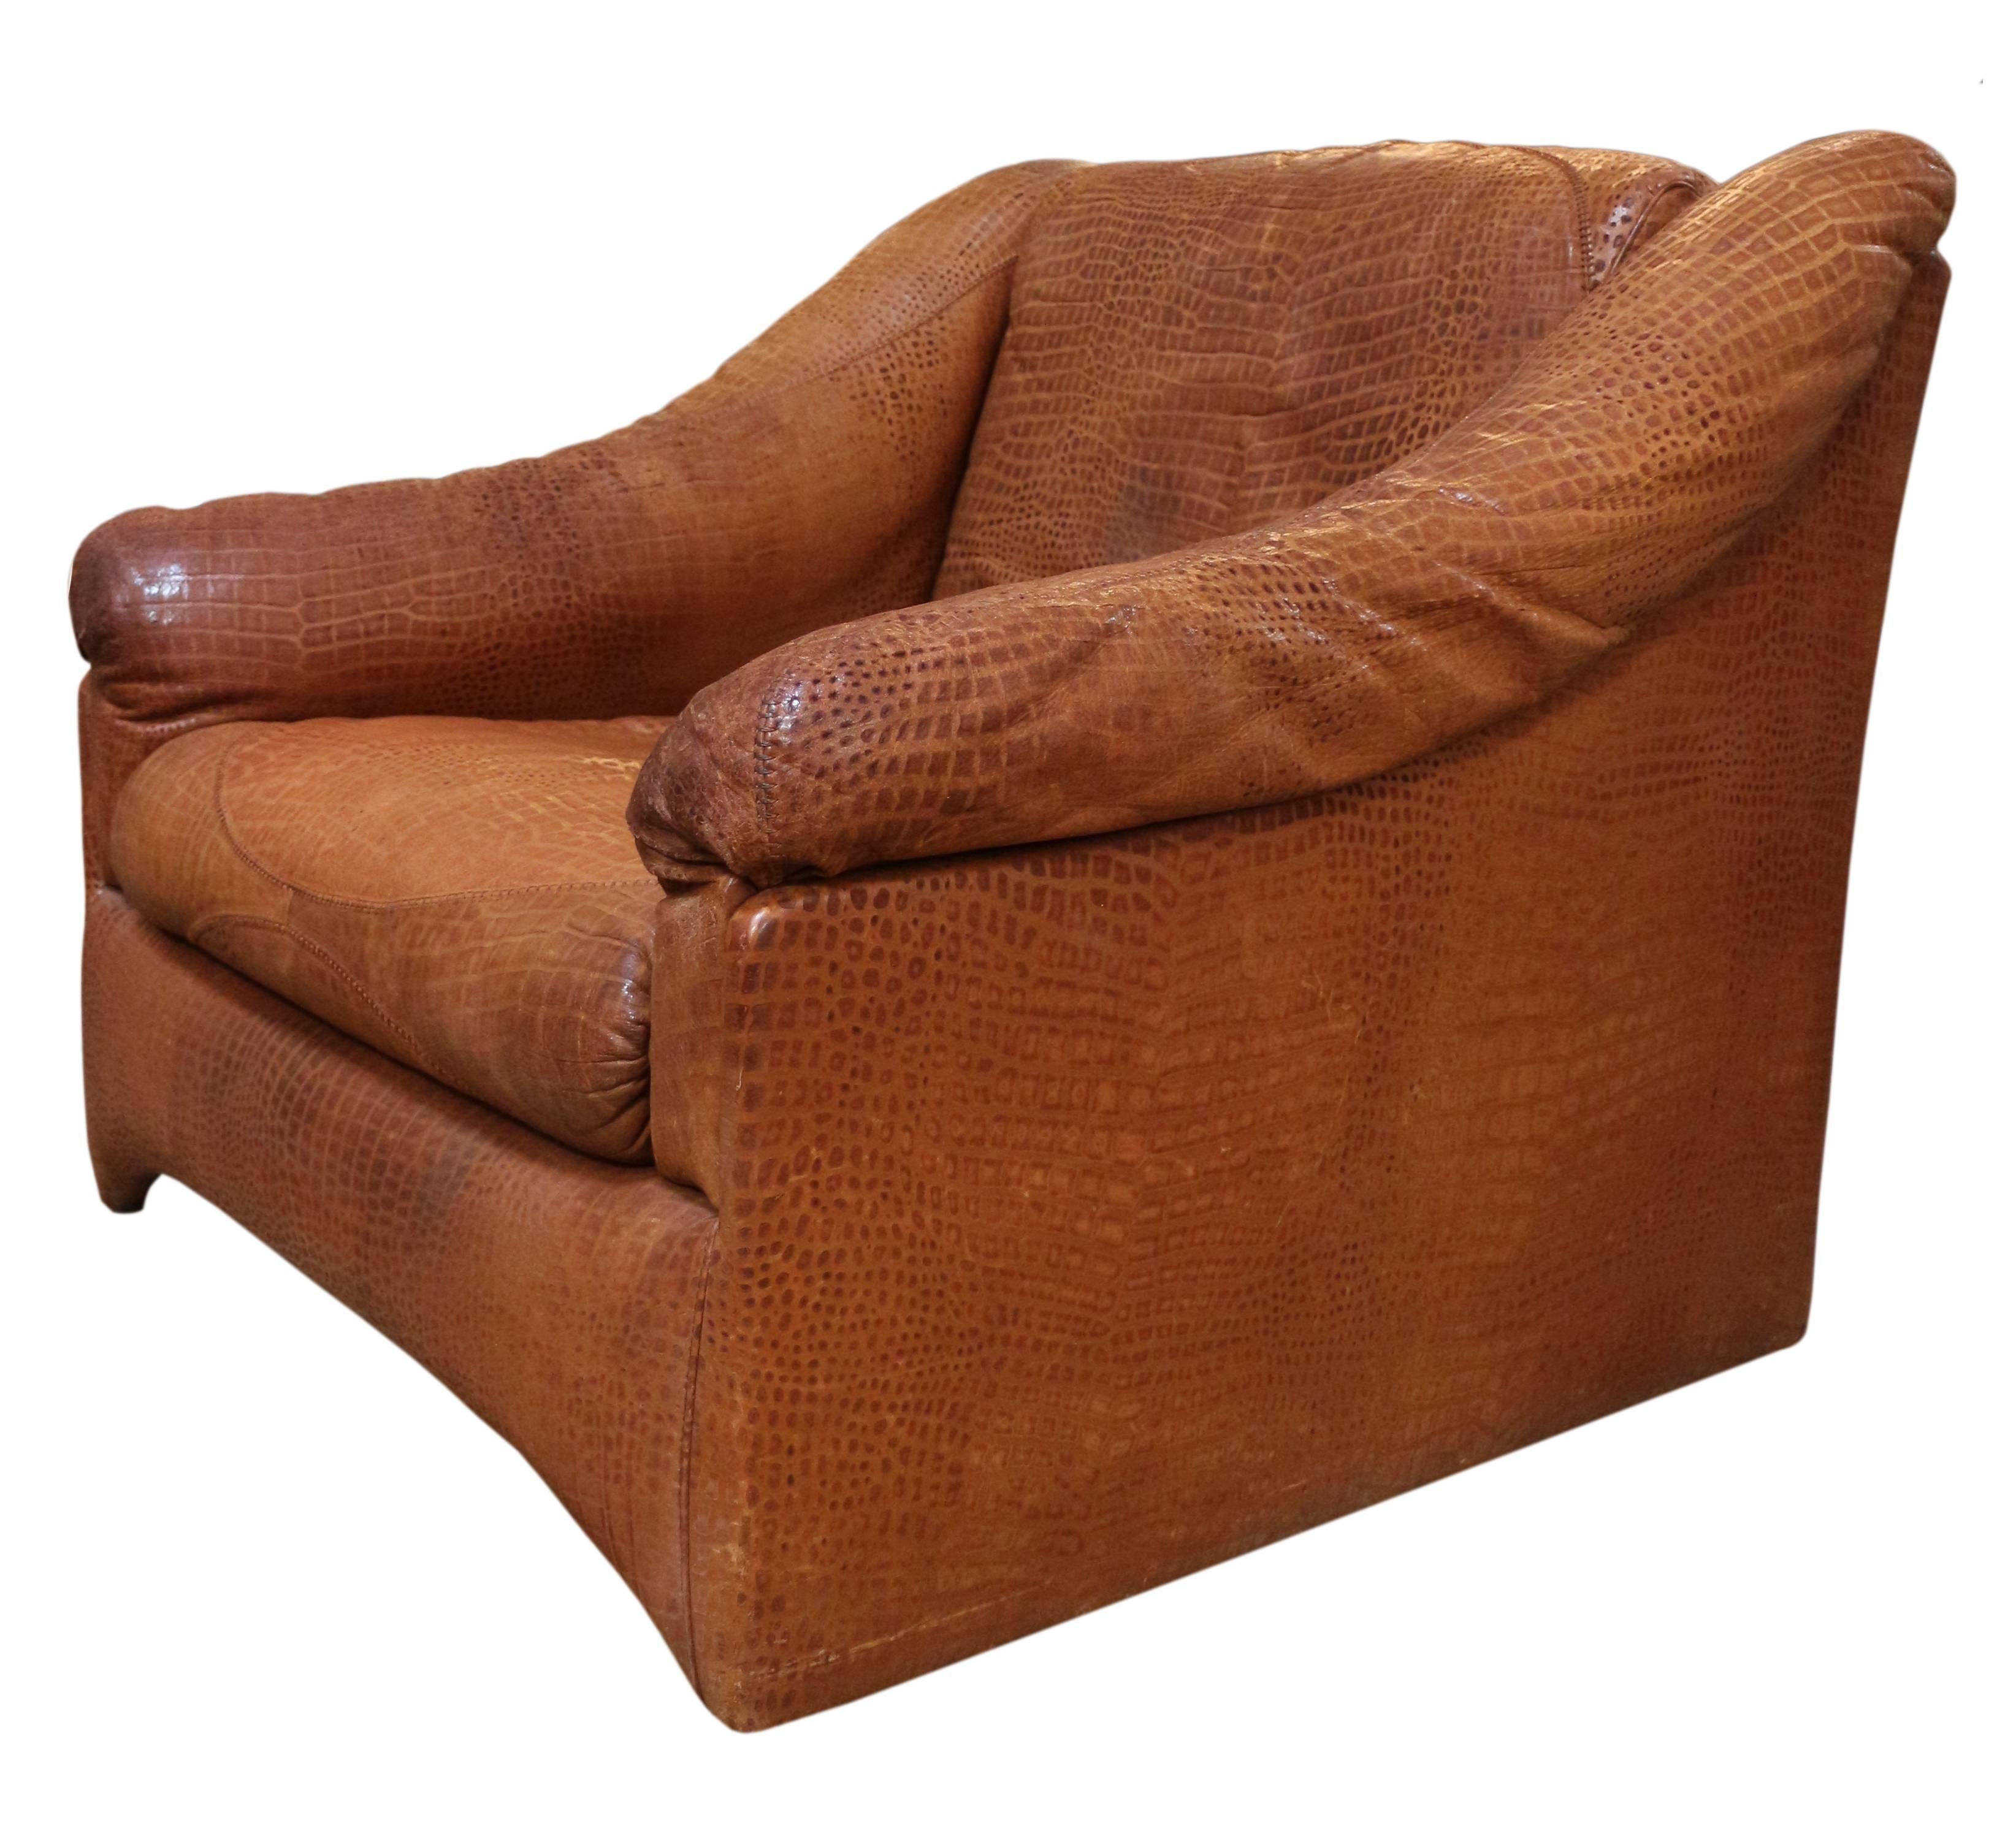 Pair of Valenti Leather Armchairs In Good Condition For Sale In West Hollywood, CA